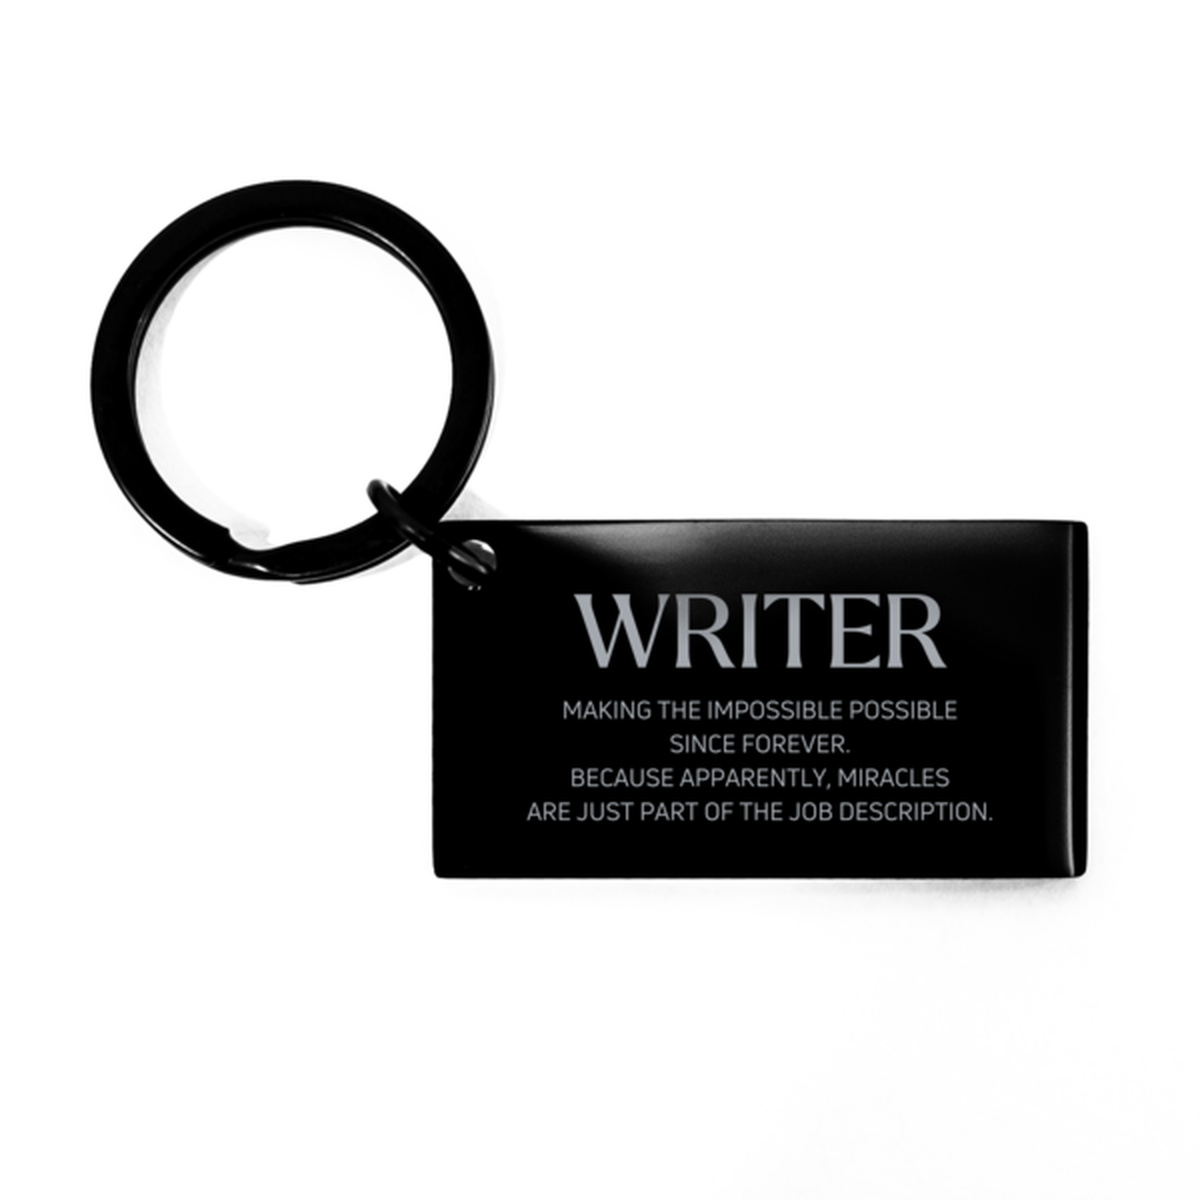 Funny Writer Gifts, Miracles are just part of the job description, Inspirational Birthday Keychain For Writer, Men, Women, Coworkers, Friends, Boss